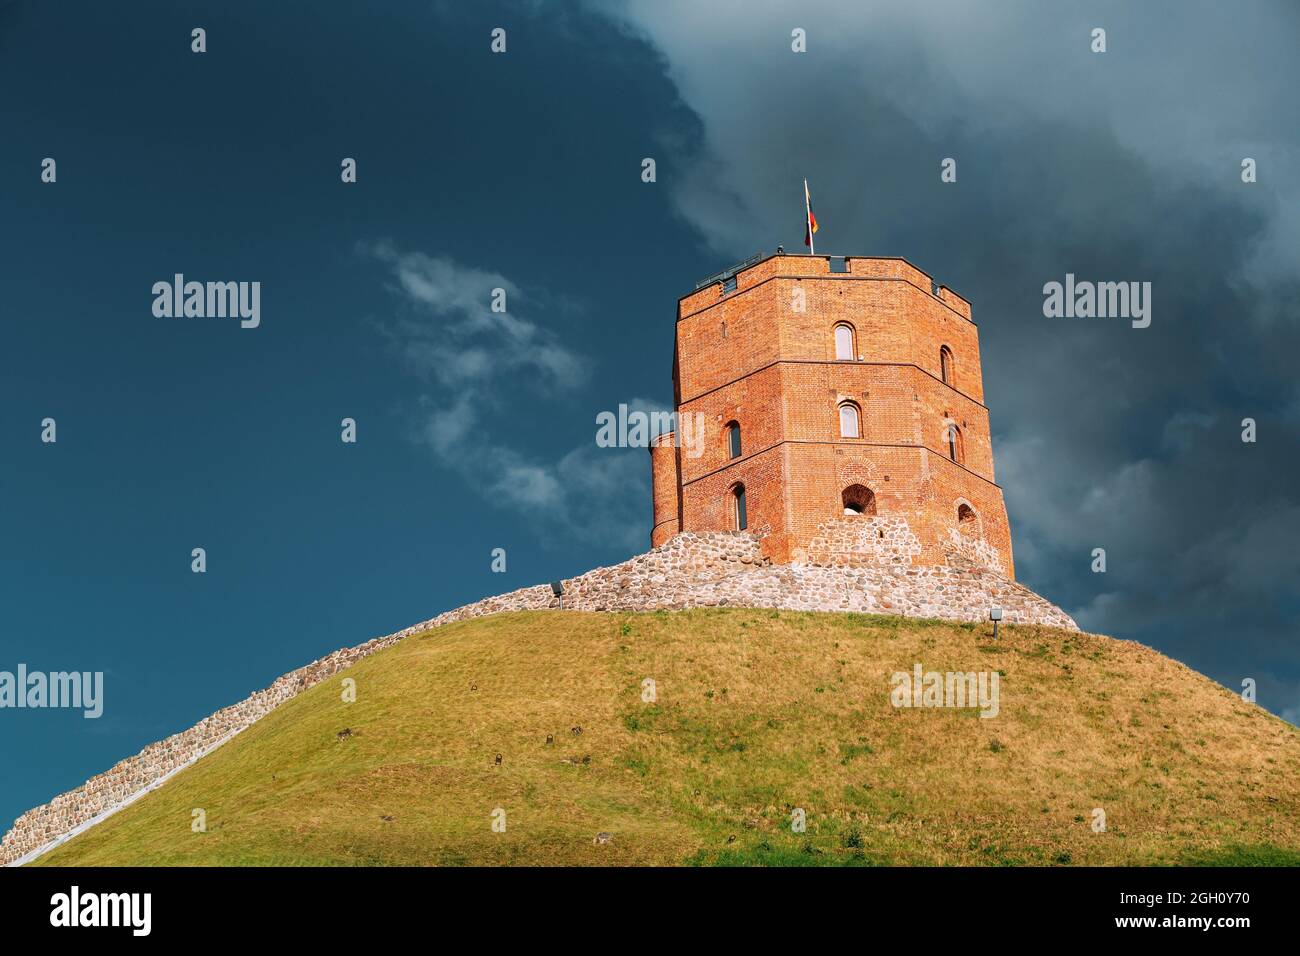 Vilnius, Lithuania. Famous Tower Of Gediminas Or Gedimino In Historic Center. UNESCO World Heritage. Upper Vilnius Castle Complex In Old Town Is Stock Photo